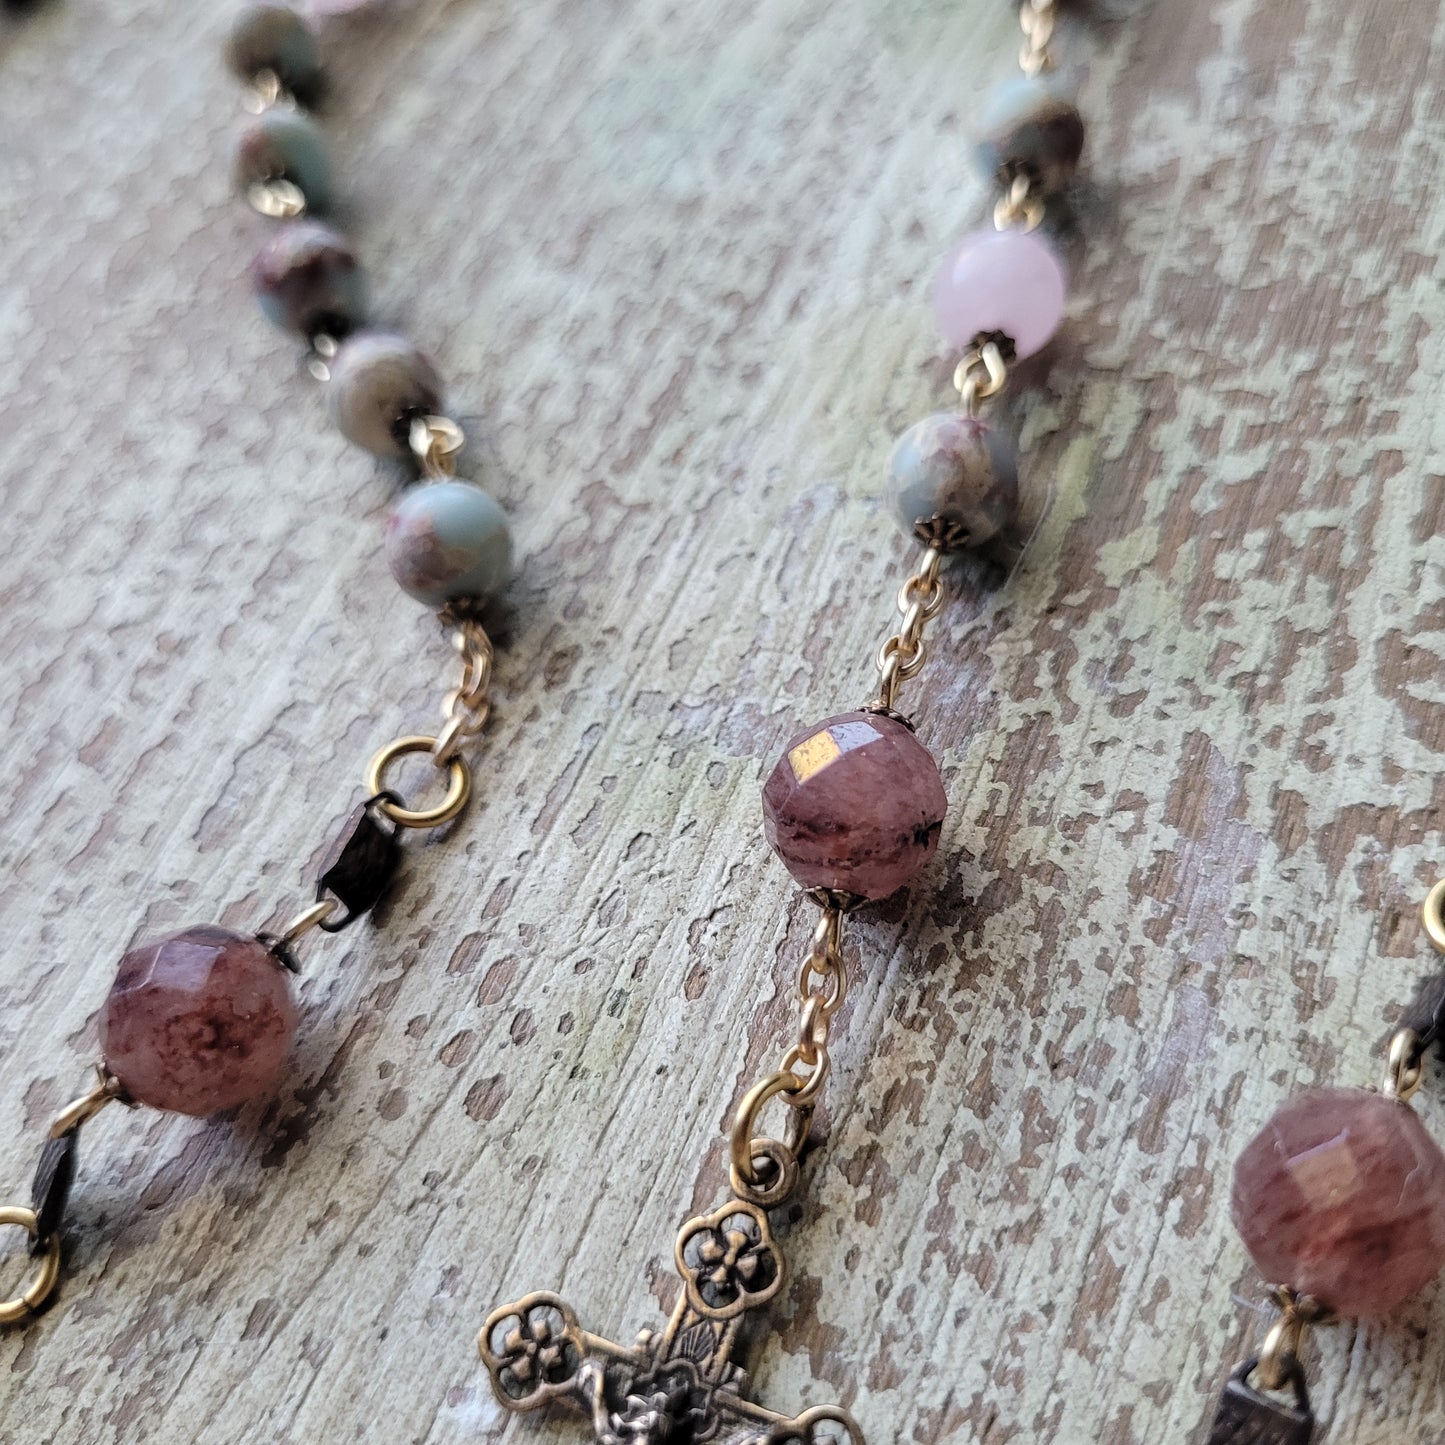 Lourdes, Crucifix, Pink and Blue Rosary Beads